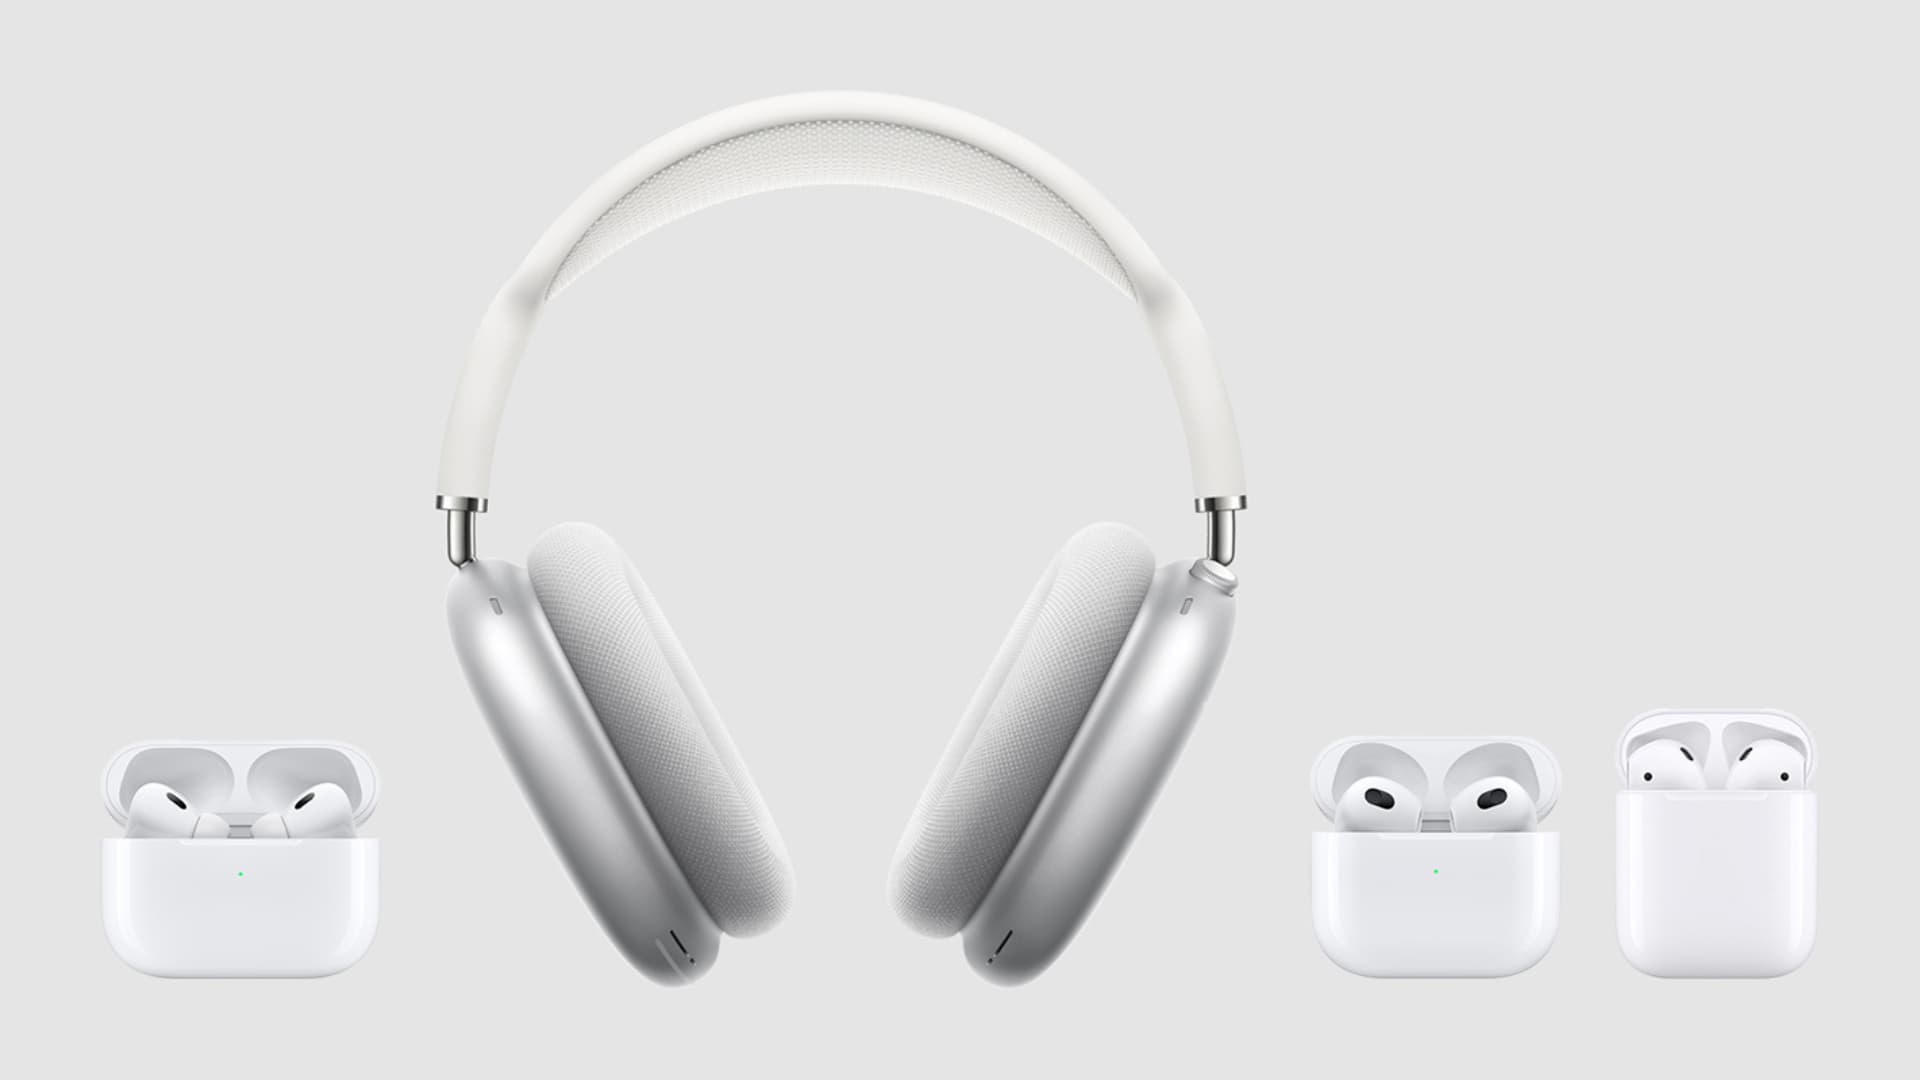 AirPods, AirPods 3rd generation, AirPods Pro, and AirPods Max on a gray background